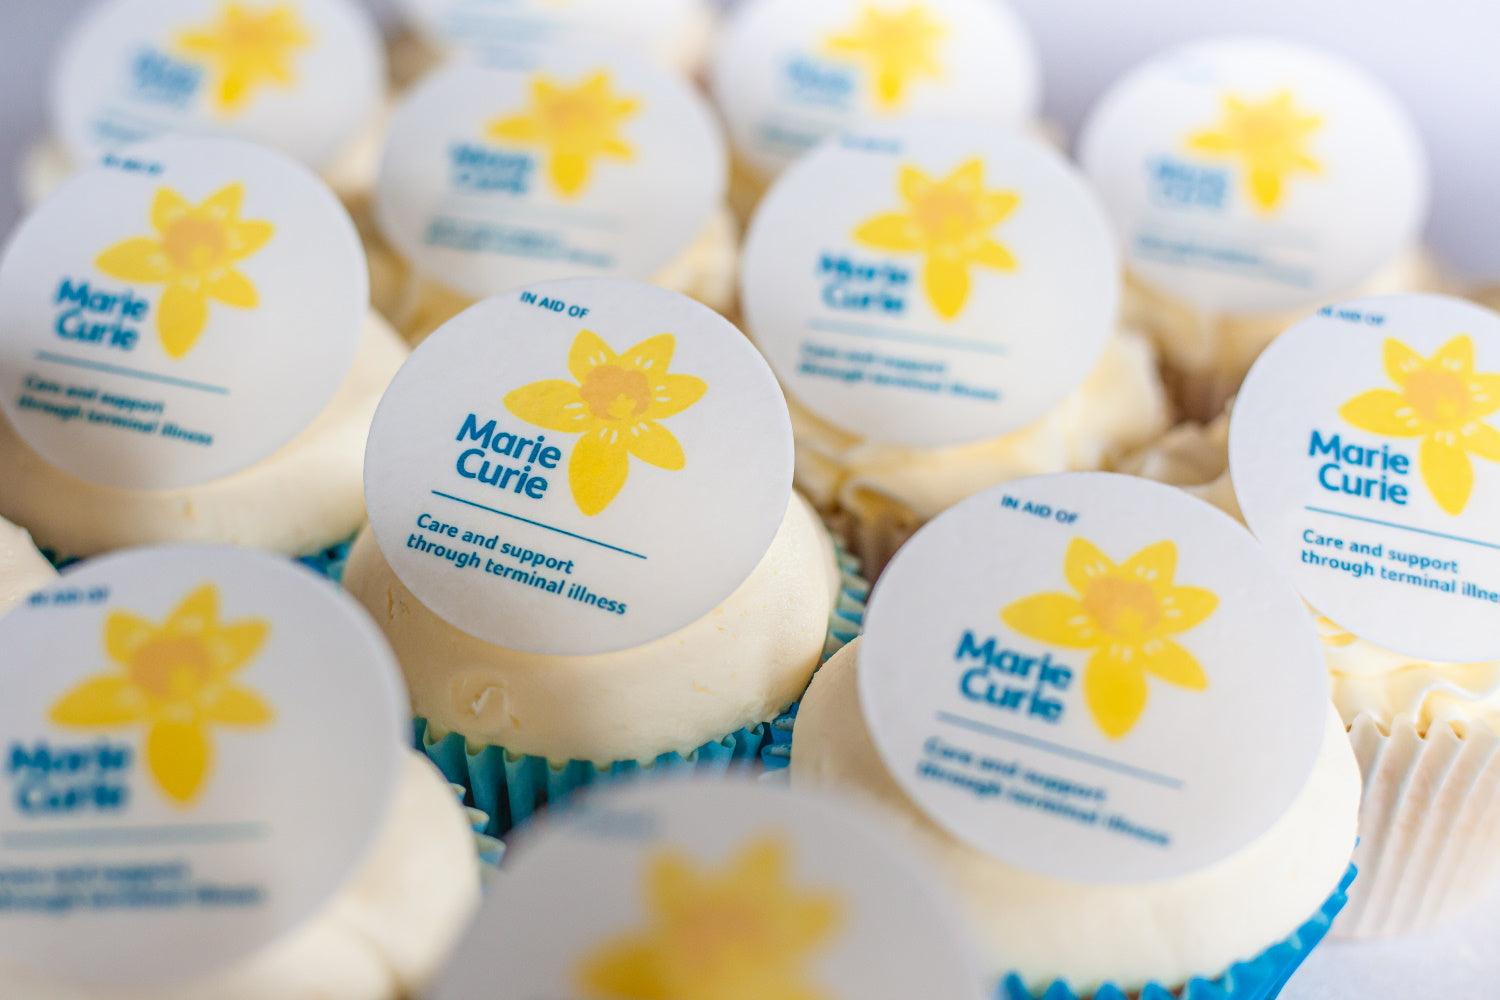 Edible cupcake toppers and cake toppers for Marie Curie charity fundraising